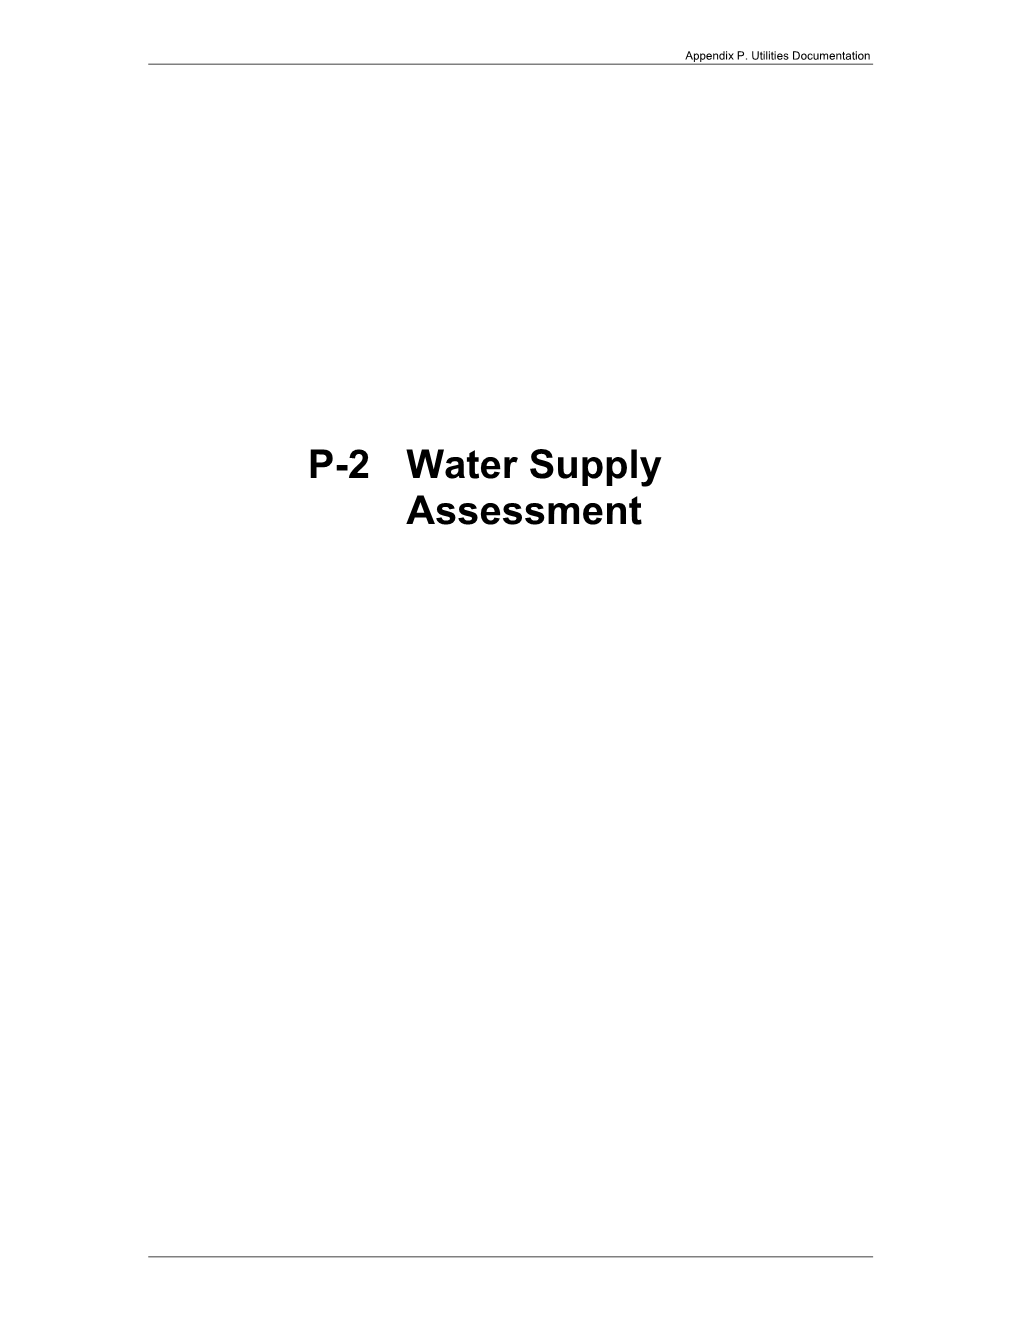 P-2 Water Supply Assessment